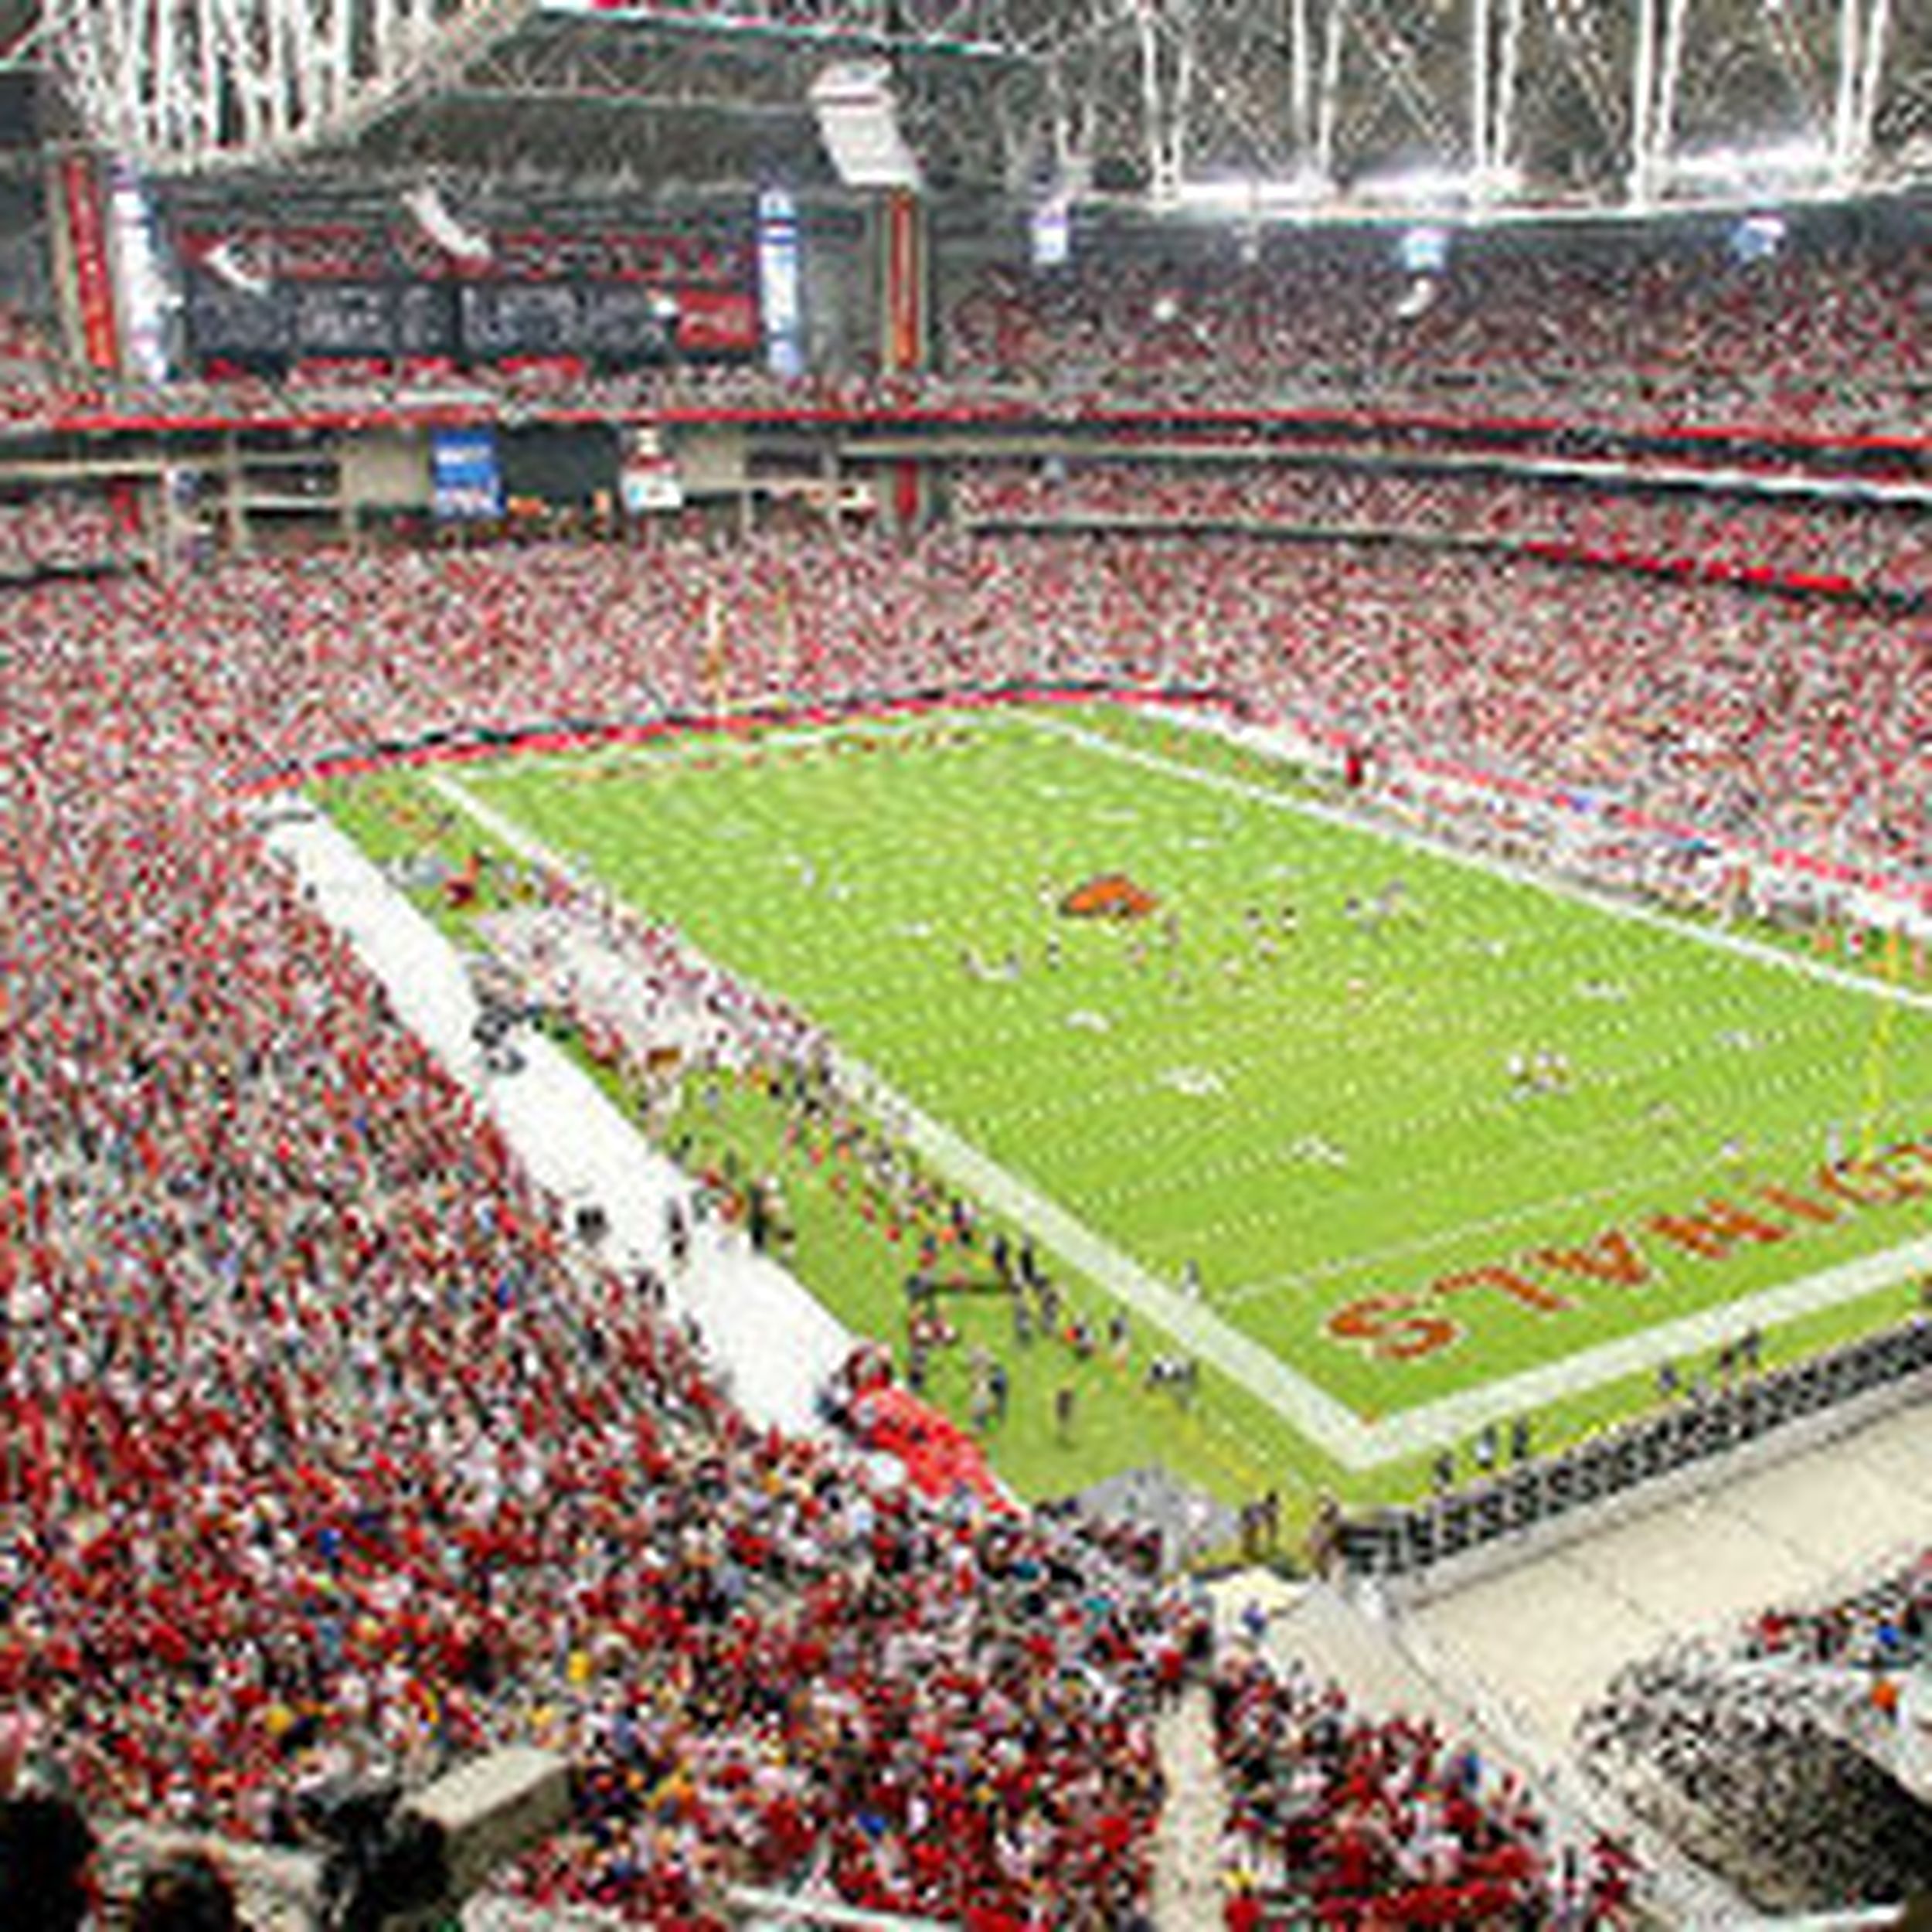 ARIZONA CARDINALS: The Cards moved to the desert in 1988, it's